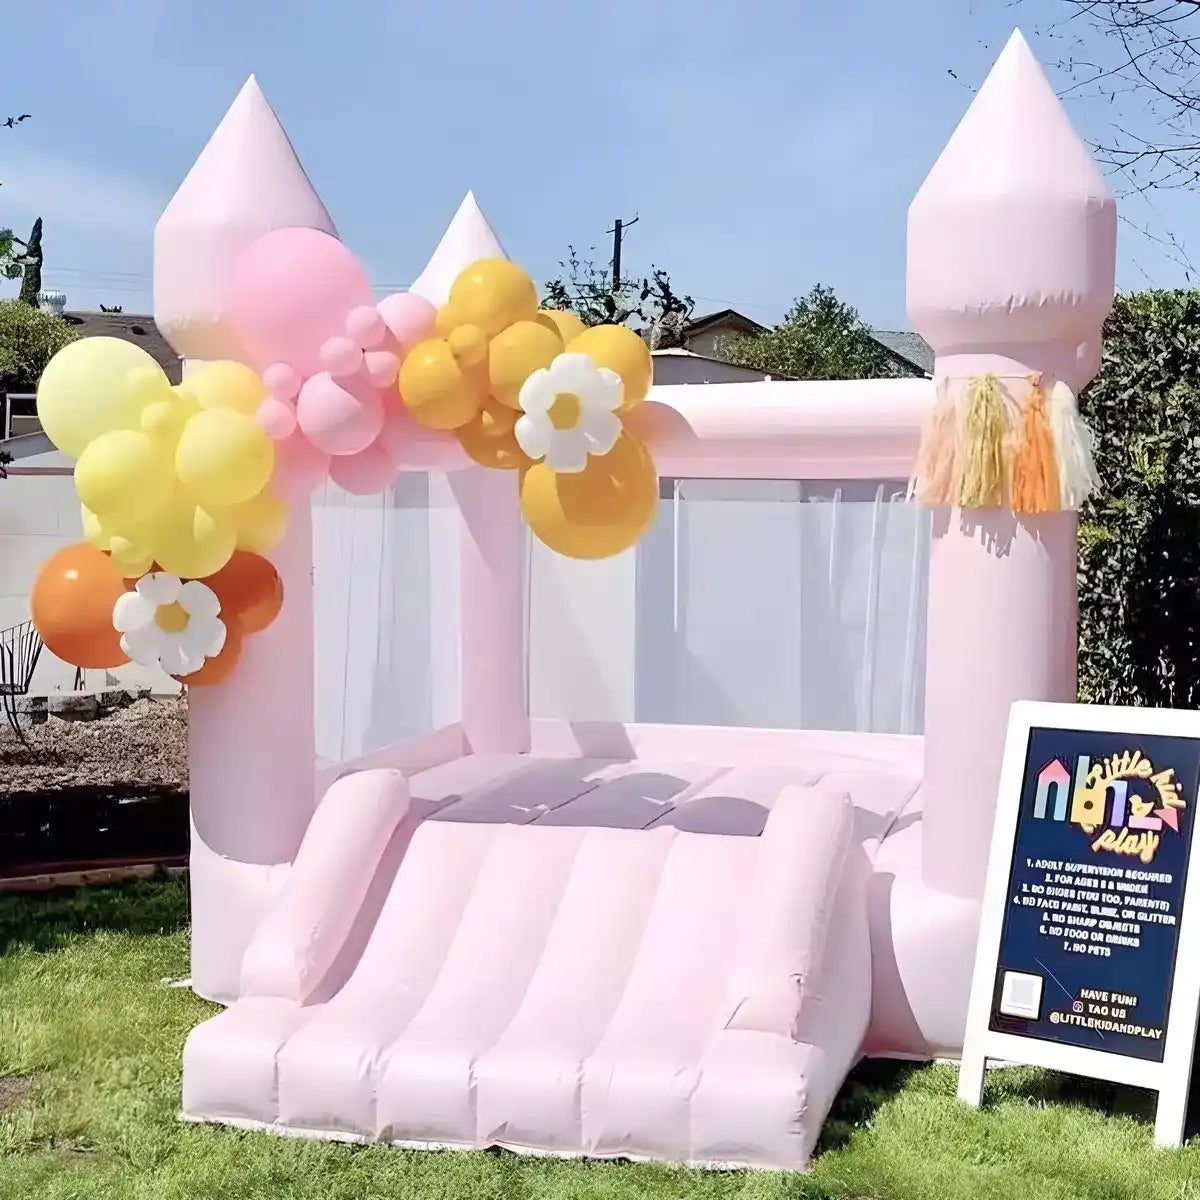 Paste Little Bounce, pink mini bounce house, with balloons and ready for party